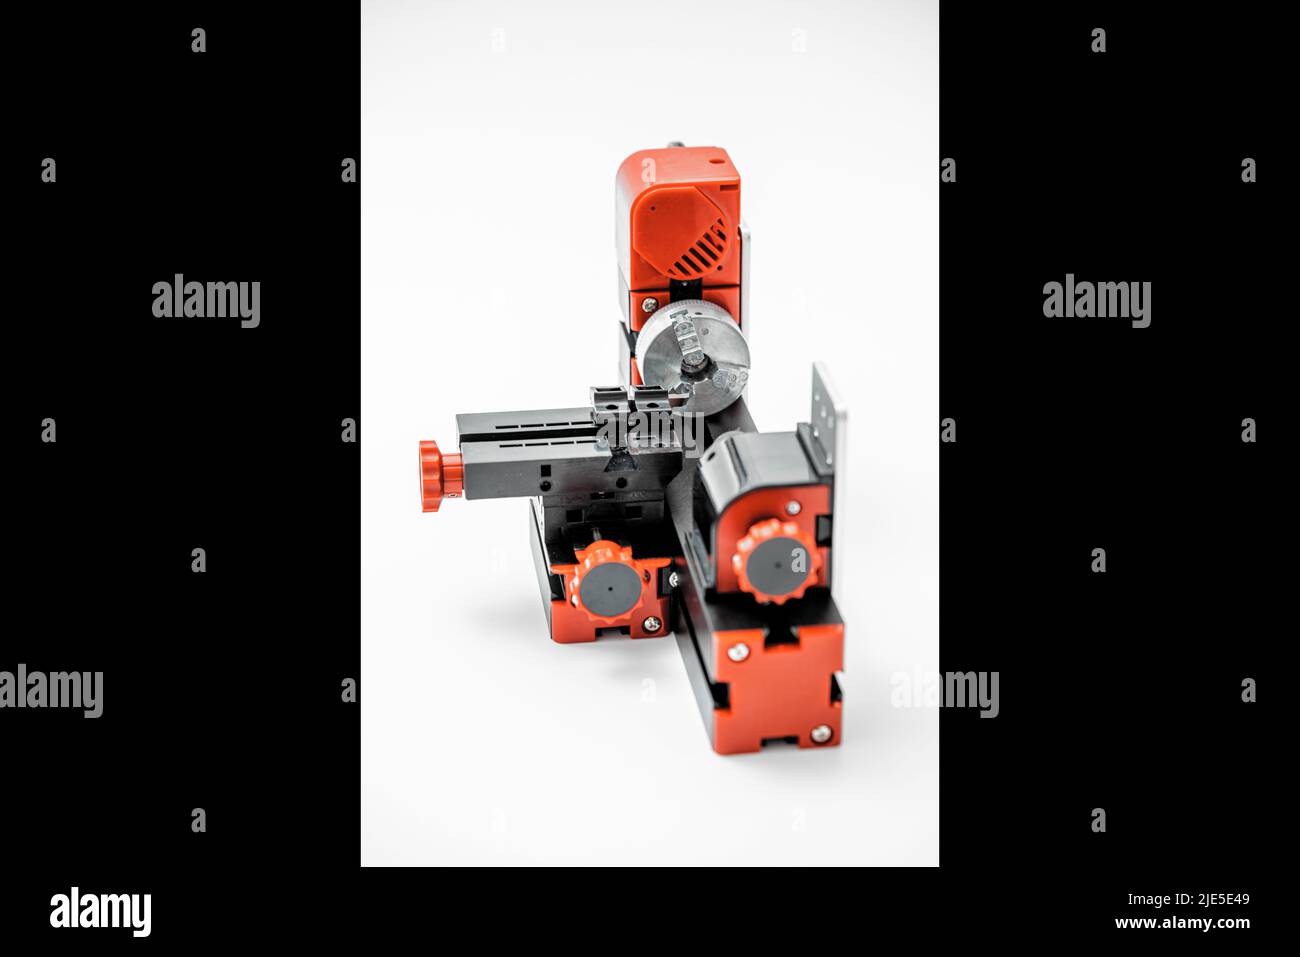 Small diy turning lathe machine for education and hobby Stock Photo